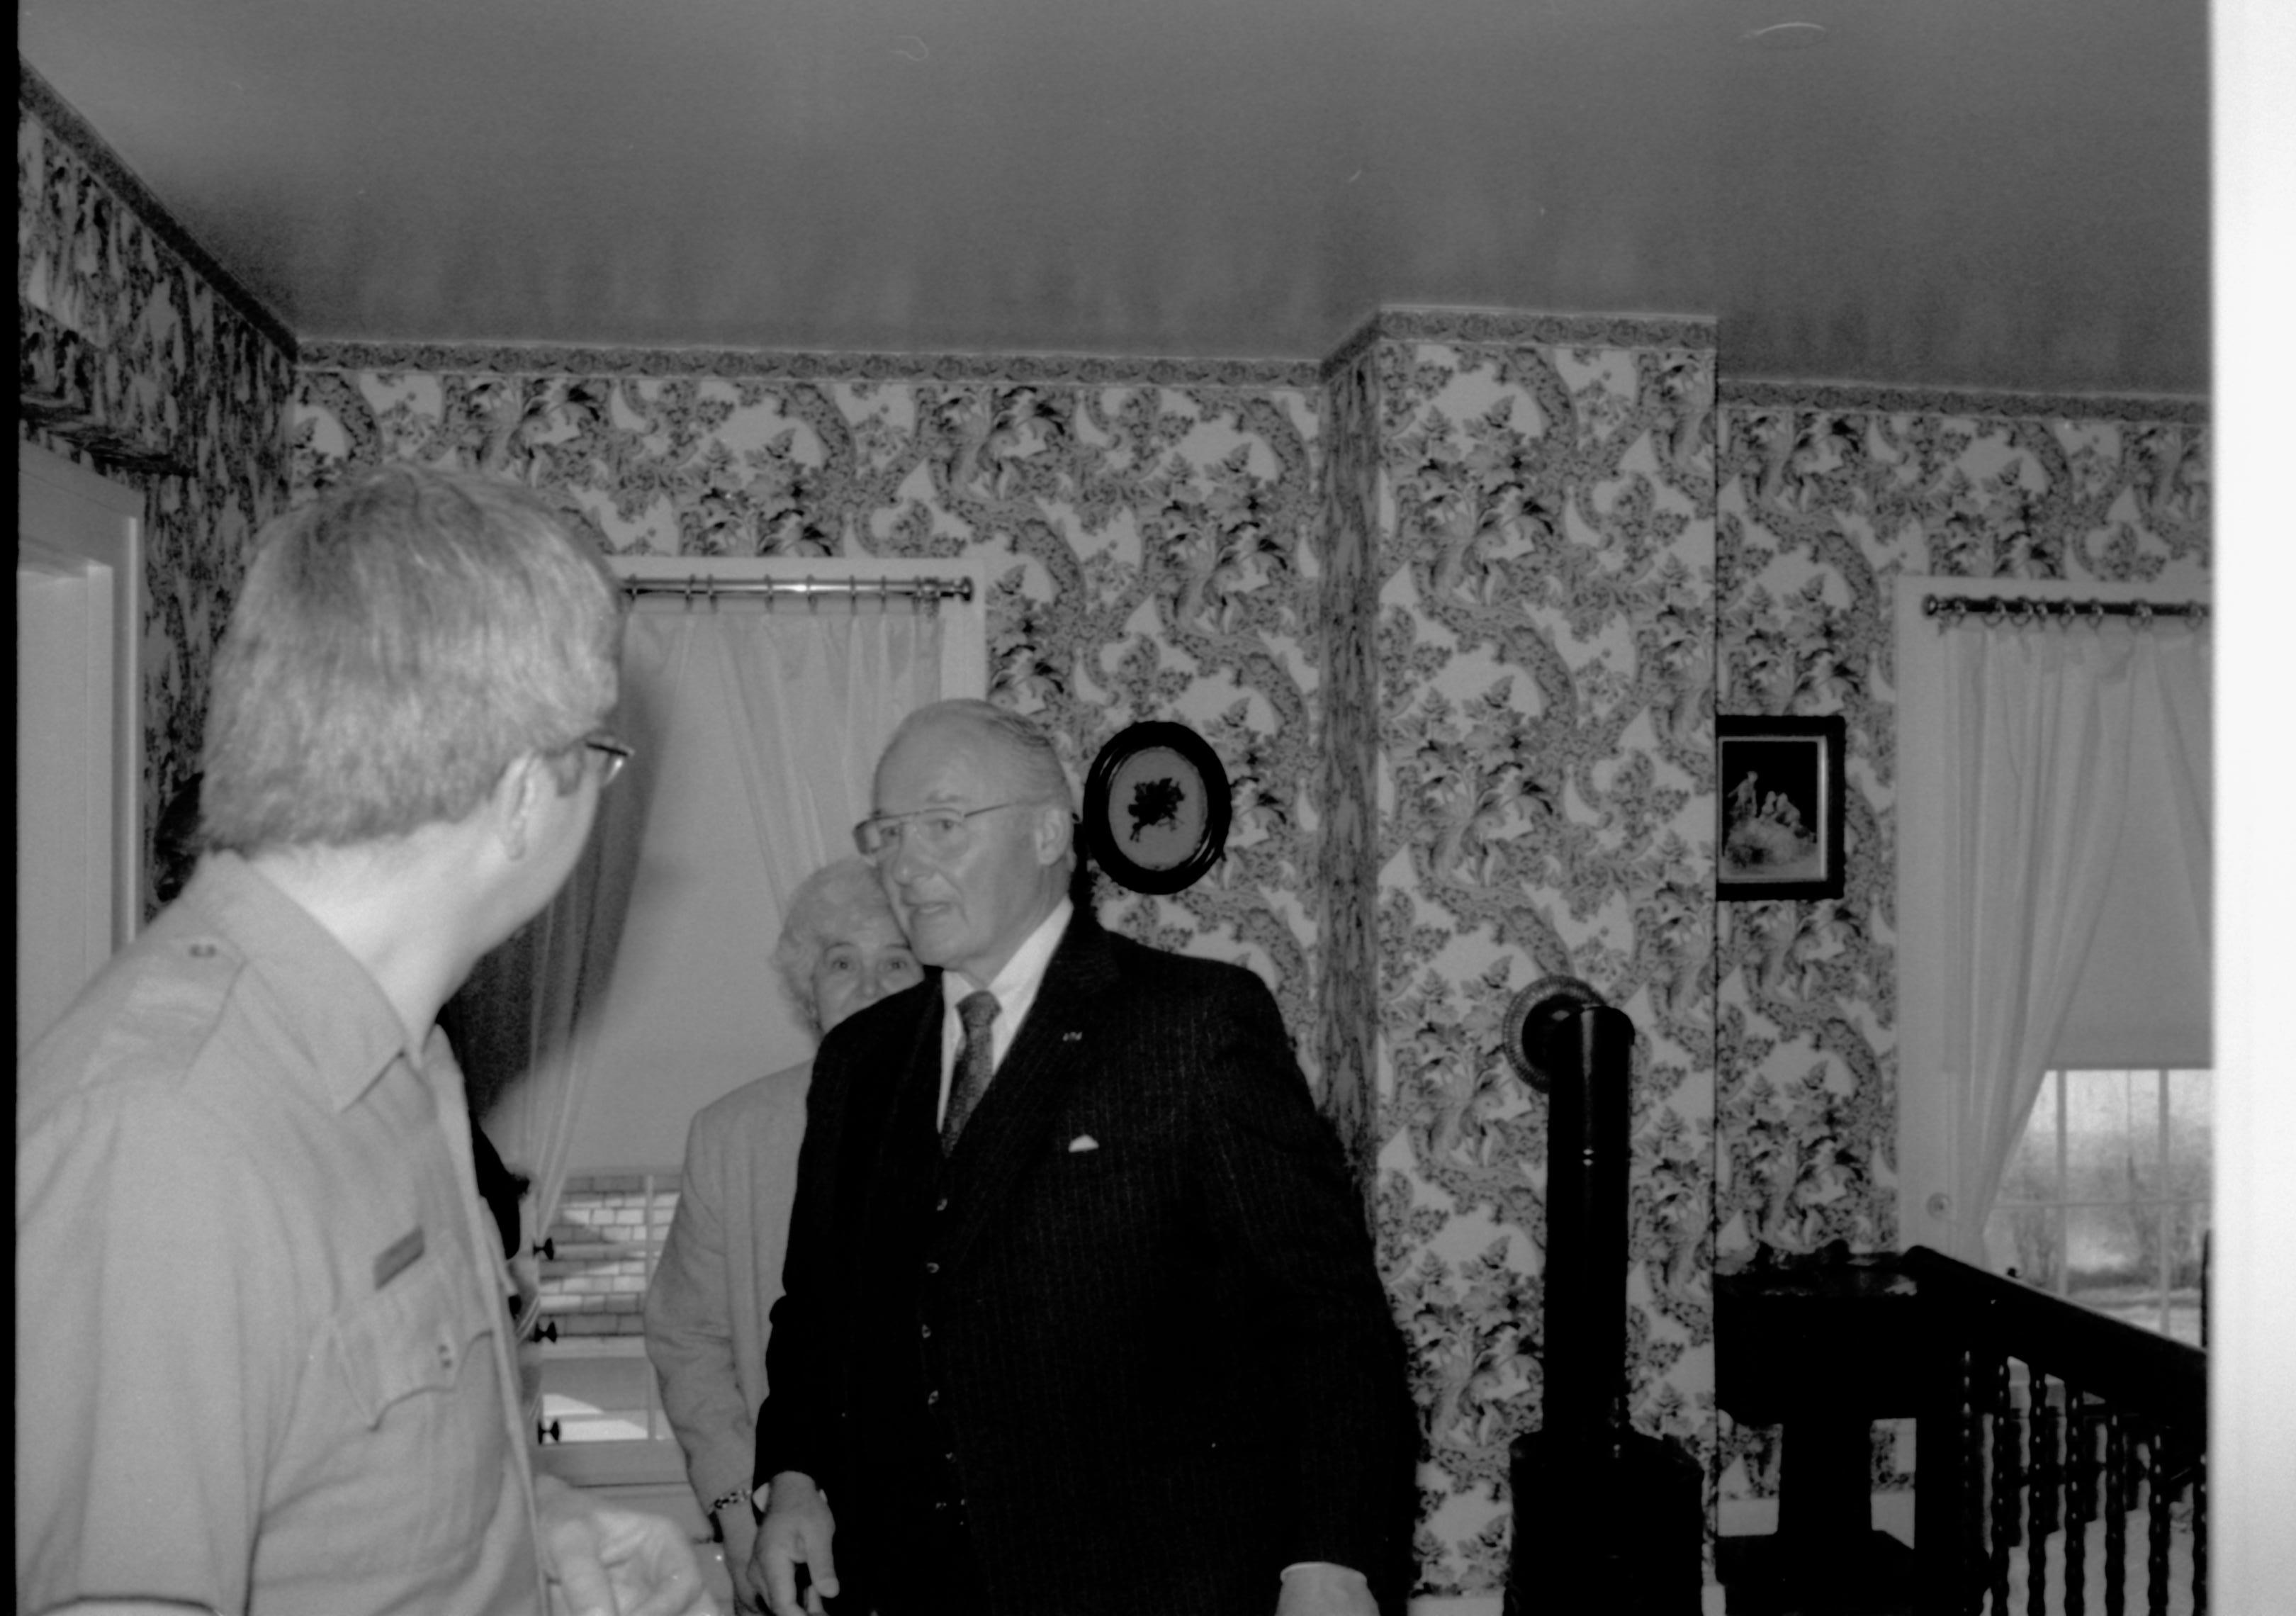 Ranger and man in Mary's bedroom. Lincoln Home NHS- VIP Findley and Michel Visit, 65A award, visit, tour